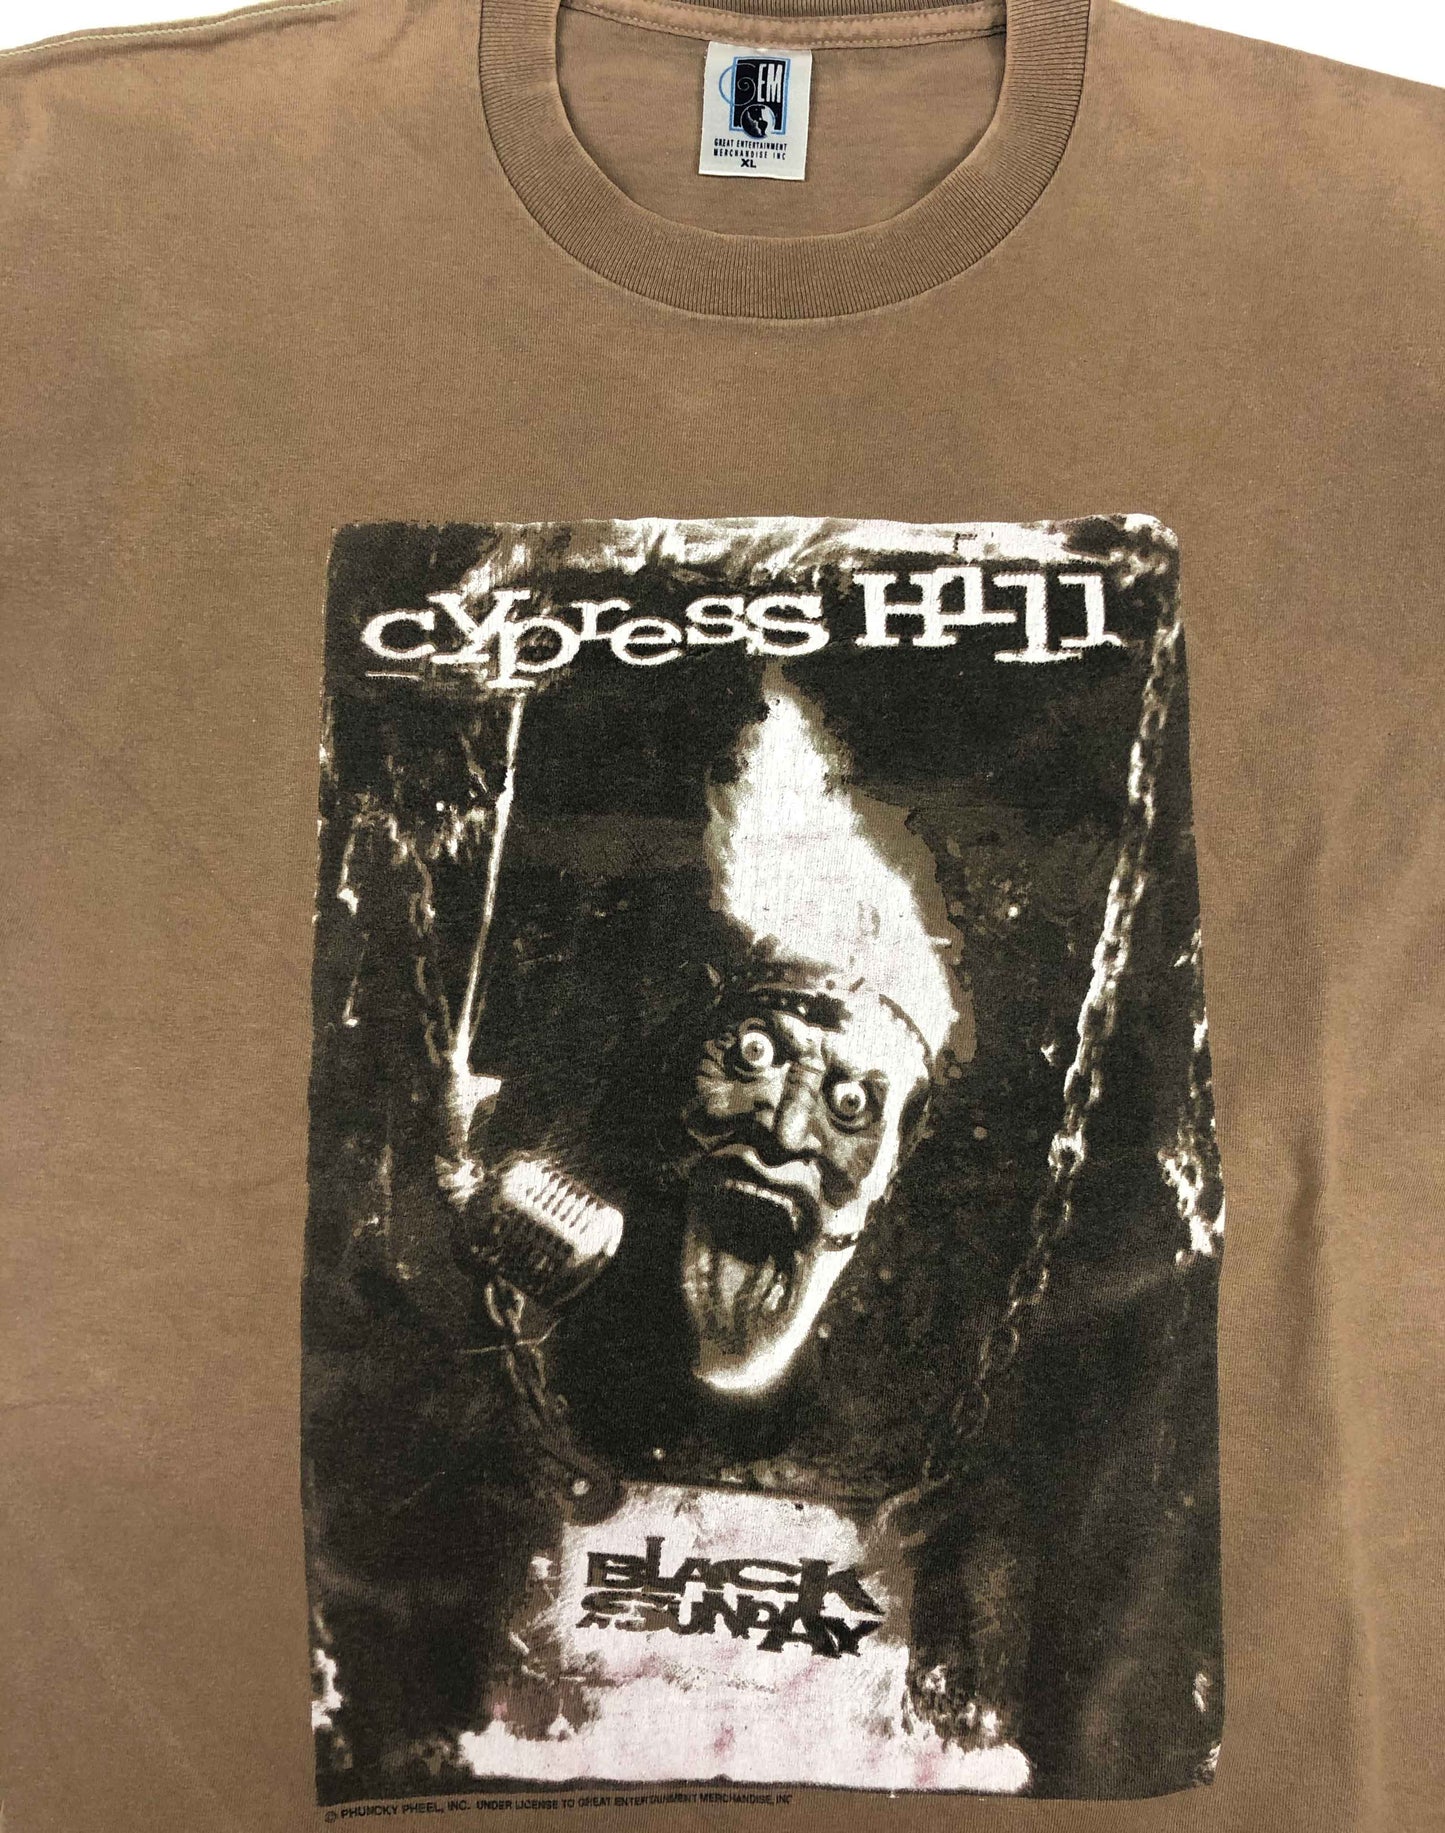 Vintage Rap T-Shirt 1993 Cypress Hill "Ain´t Going Out Like That"  Black Sunday is the second studio album by the American hip hop group Cypress Hill. The album debuted at number 1 on the US Billboard 200. They became the first Hip Hop Group ever to have 2 albums in the Top 10 of the US Billboard 200 at the same time. The album went triple platinum. The tee has a good condition and vintage look.